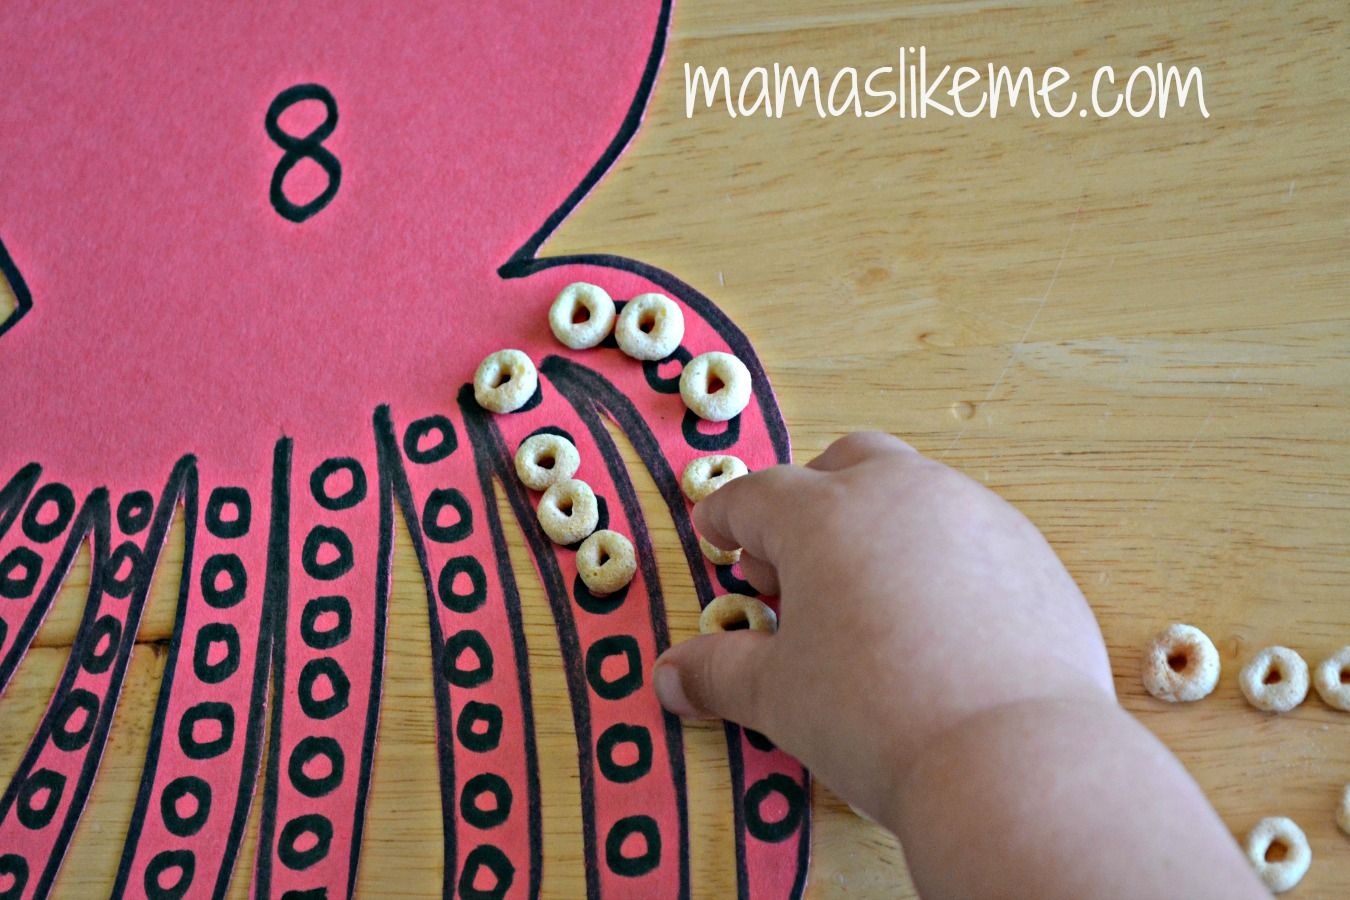 The Great 8 Octopus - Counting and Fine-Motor Skill Activity for Preschool & Toddlers